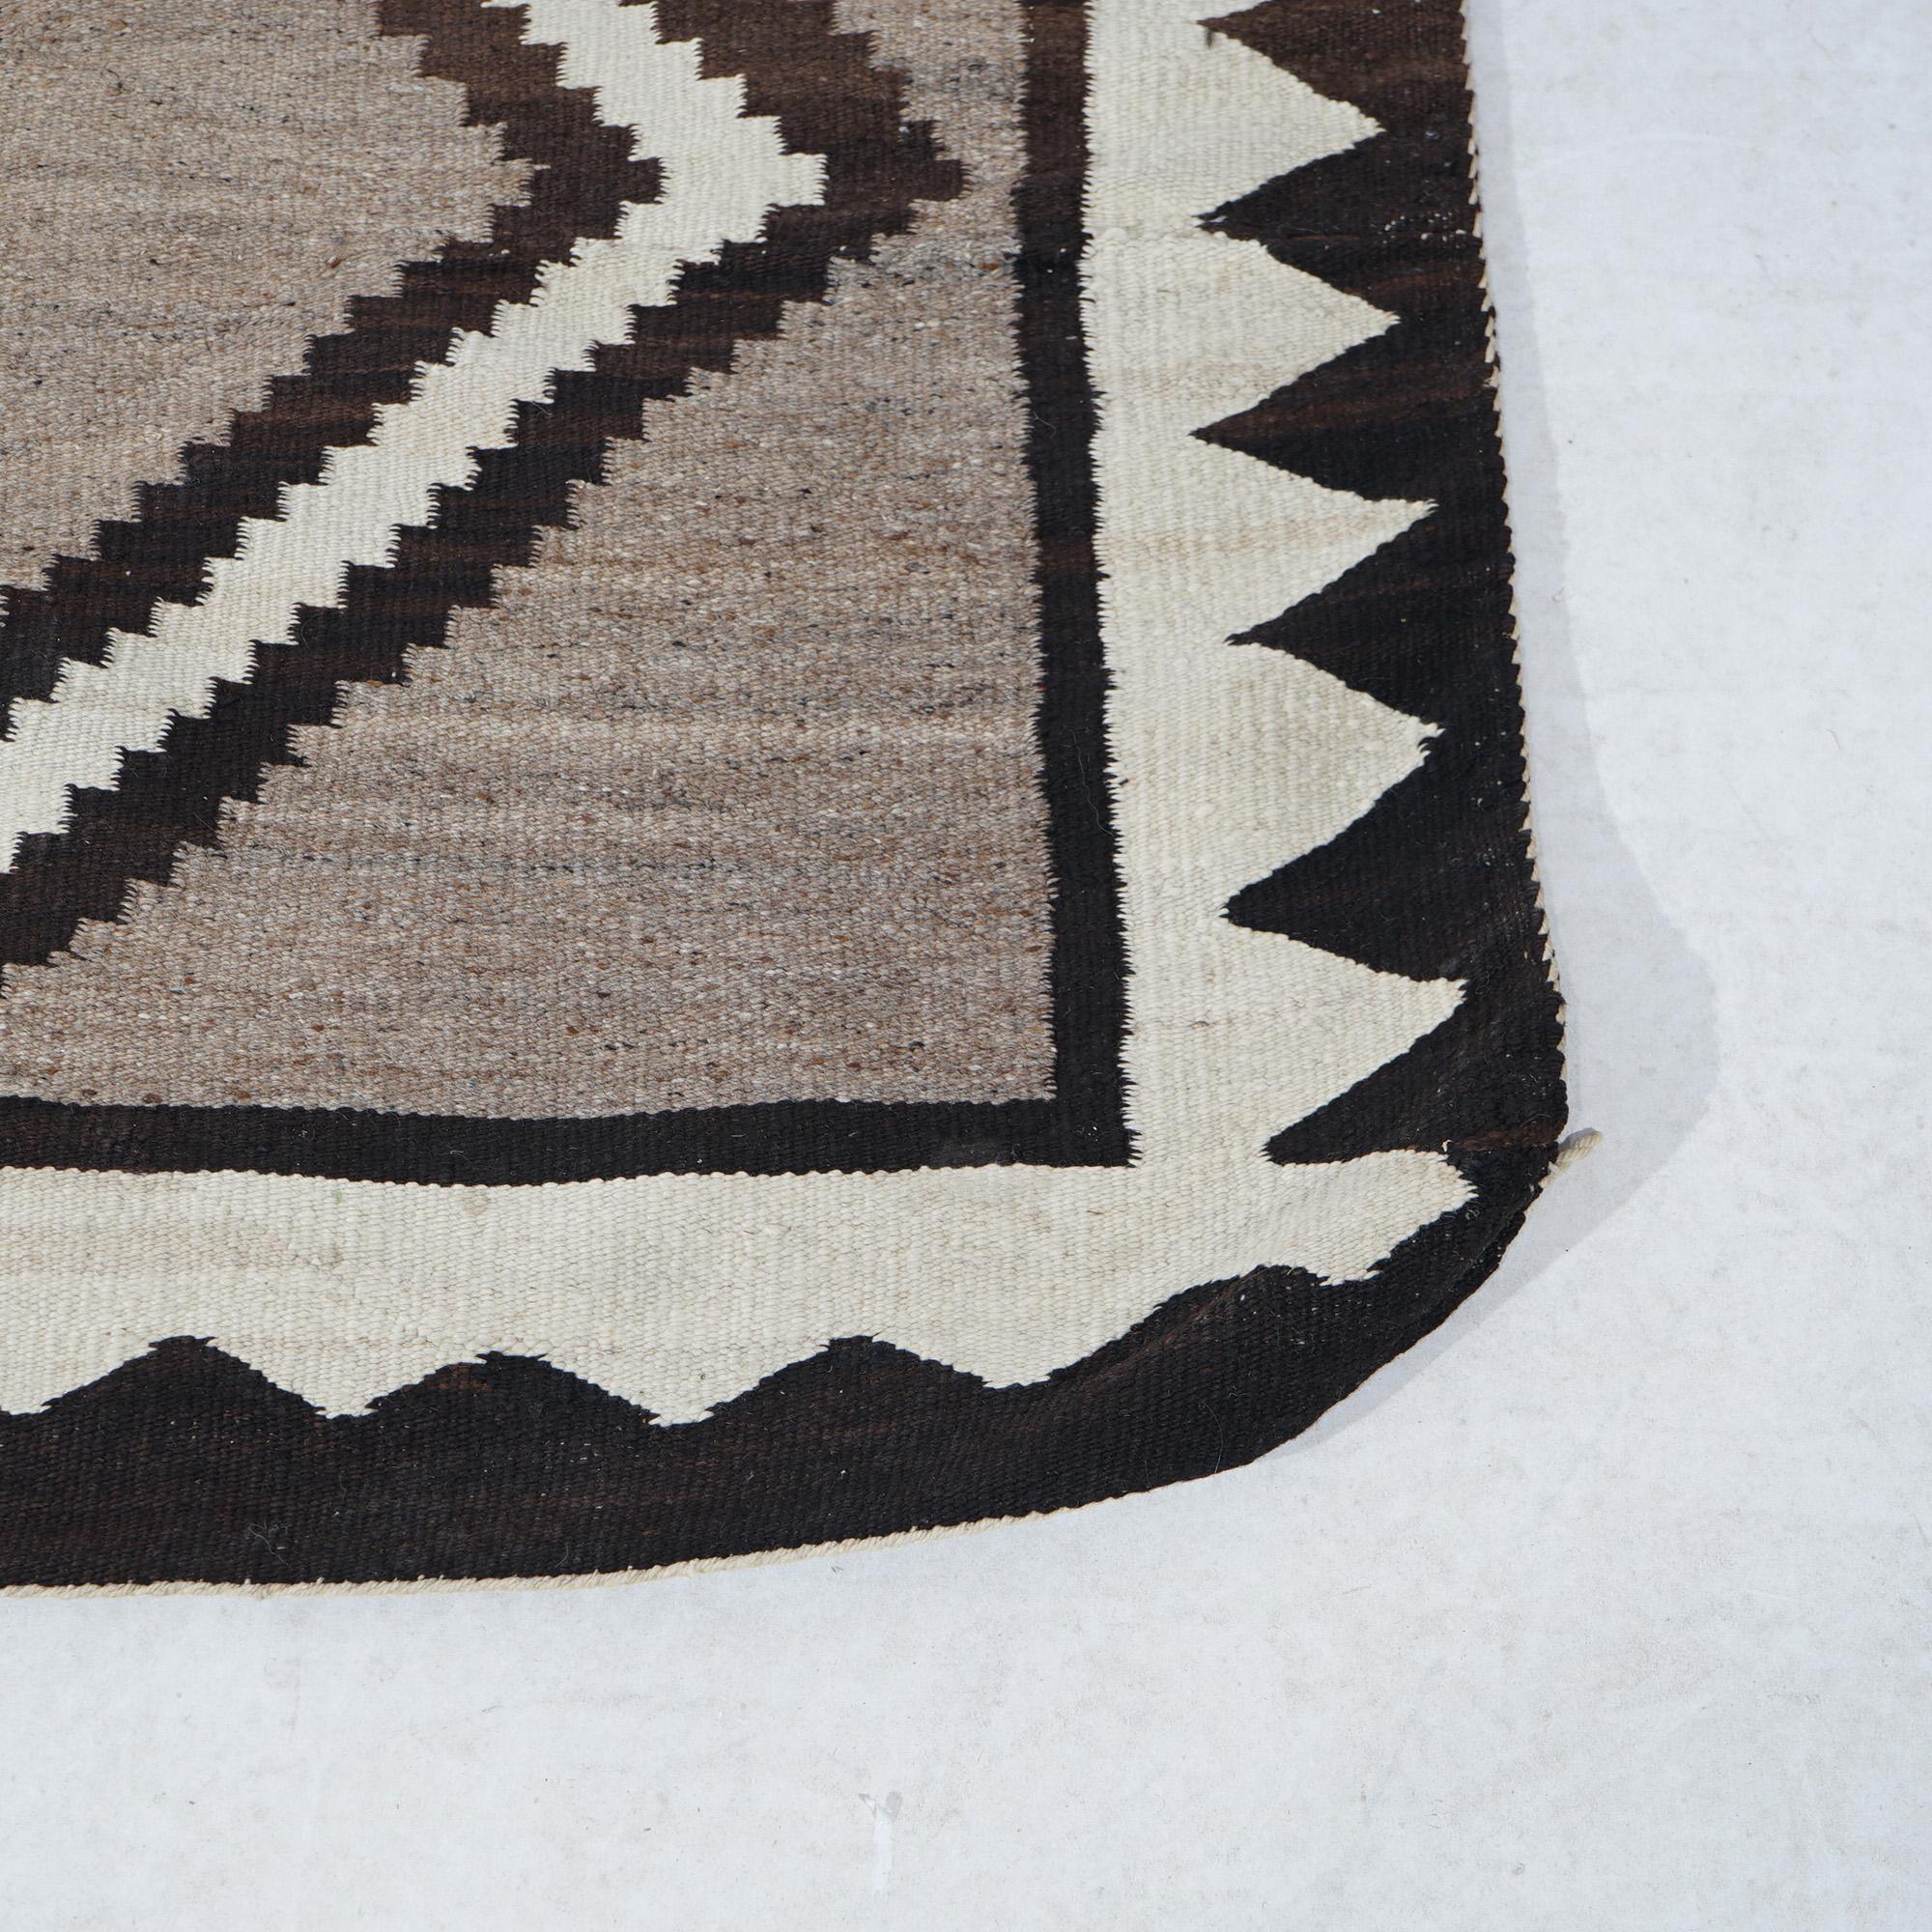 20th Century Antique Two Gray Hills Southwest American Indian Navajo Wool Rug Circa 1920 For Sale